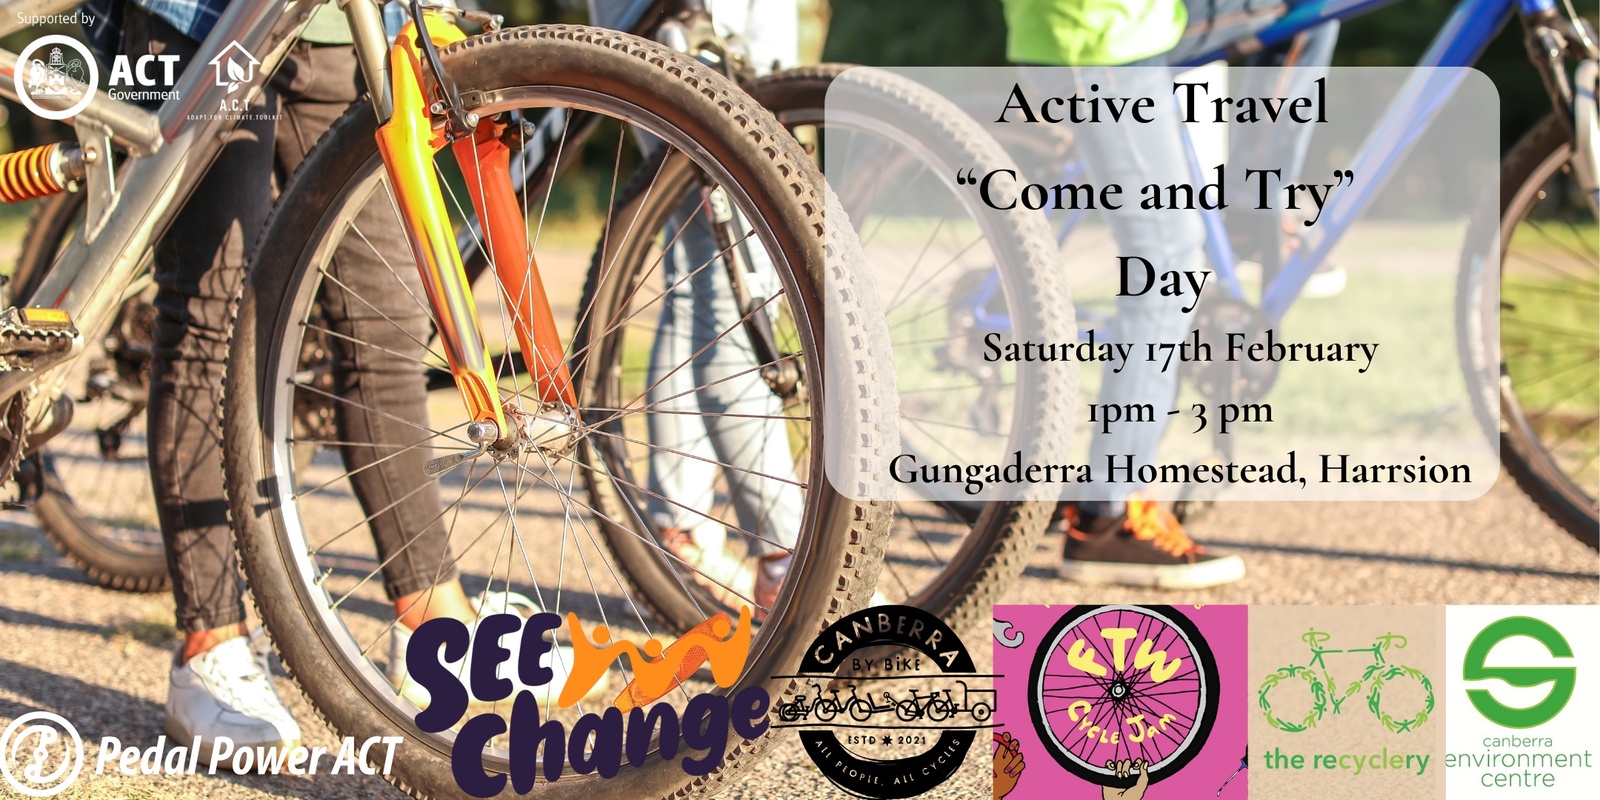 Banner image for Active Travel "Come and Try" Day